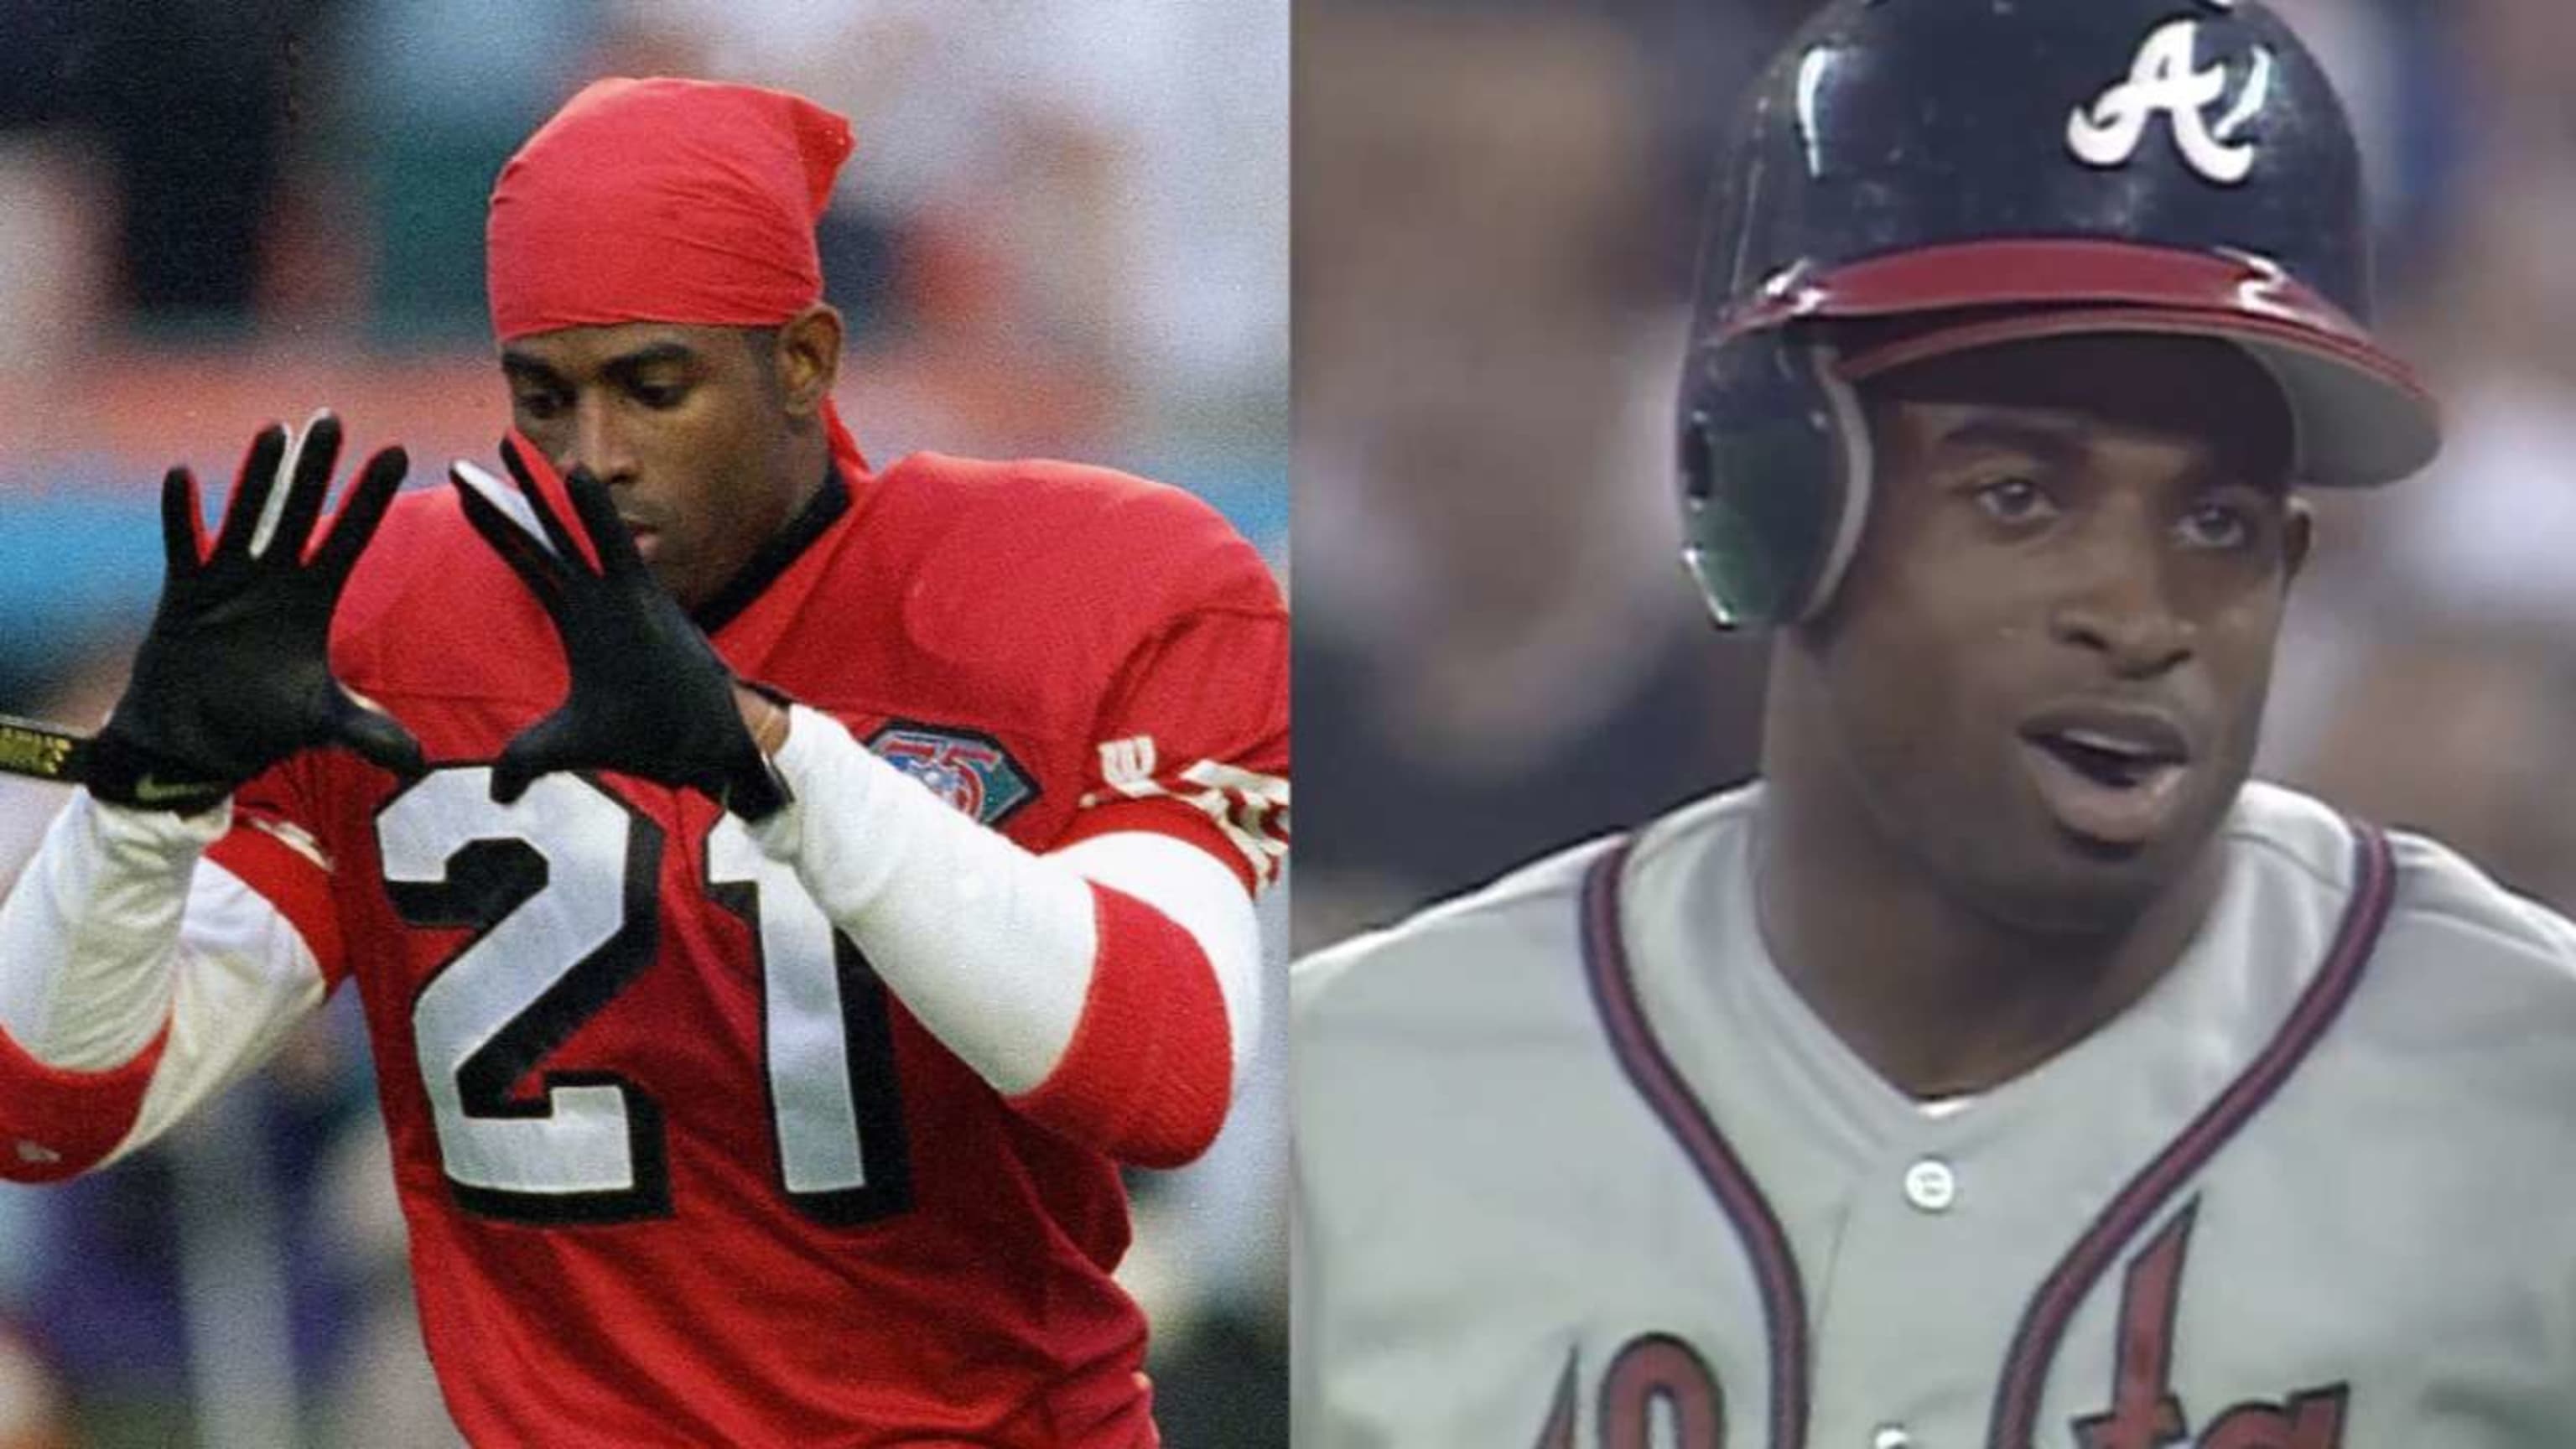 May 1, 2001: Deion Sanders puts on a show in his return after three seasons  away from baseball. In his first game since 1997, Reds outfielder Deion, By Blacks in Baseball